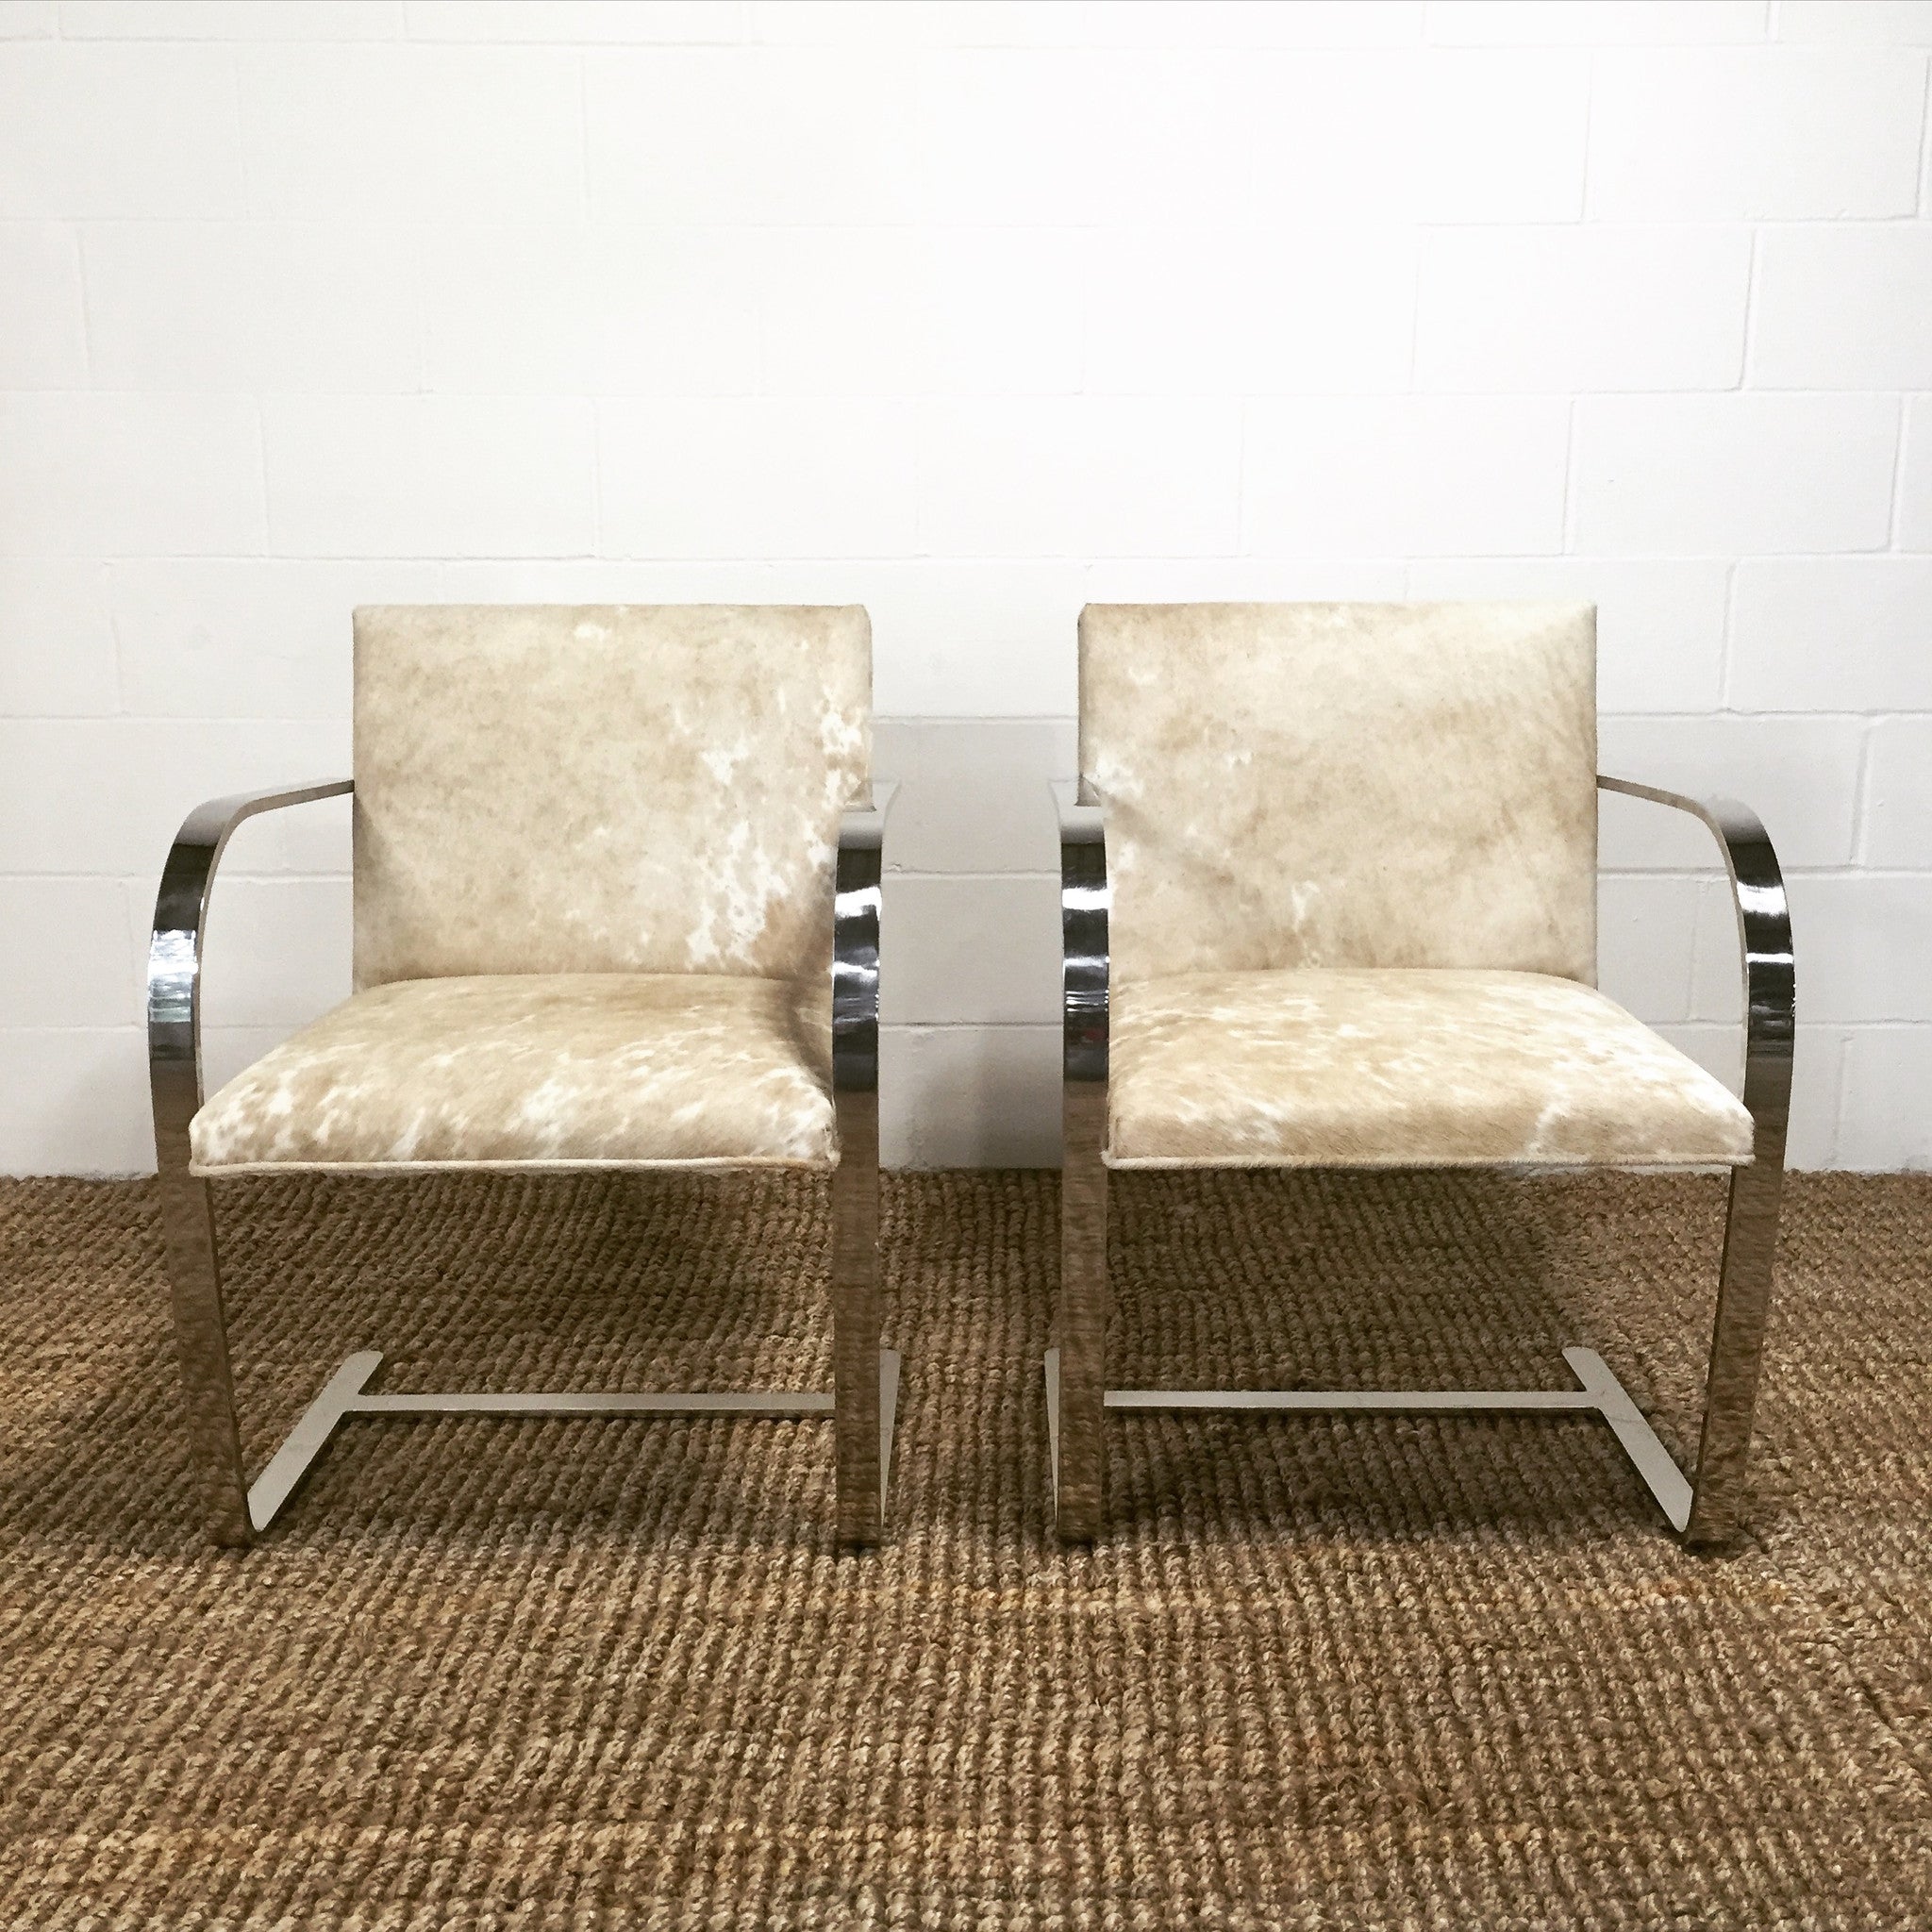 Brno Chairs in Brazilian Cowhide, pair - FORSYTH